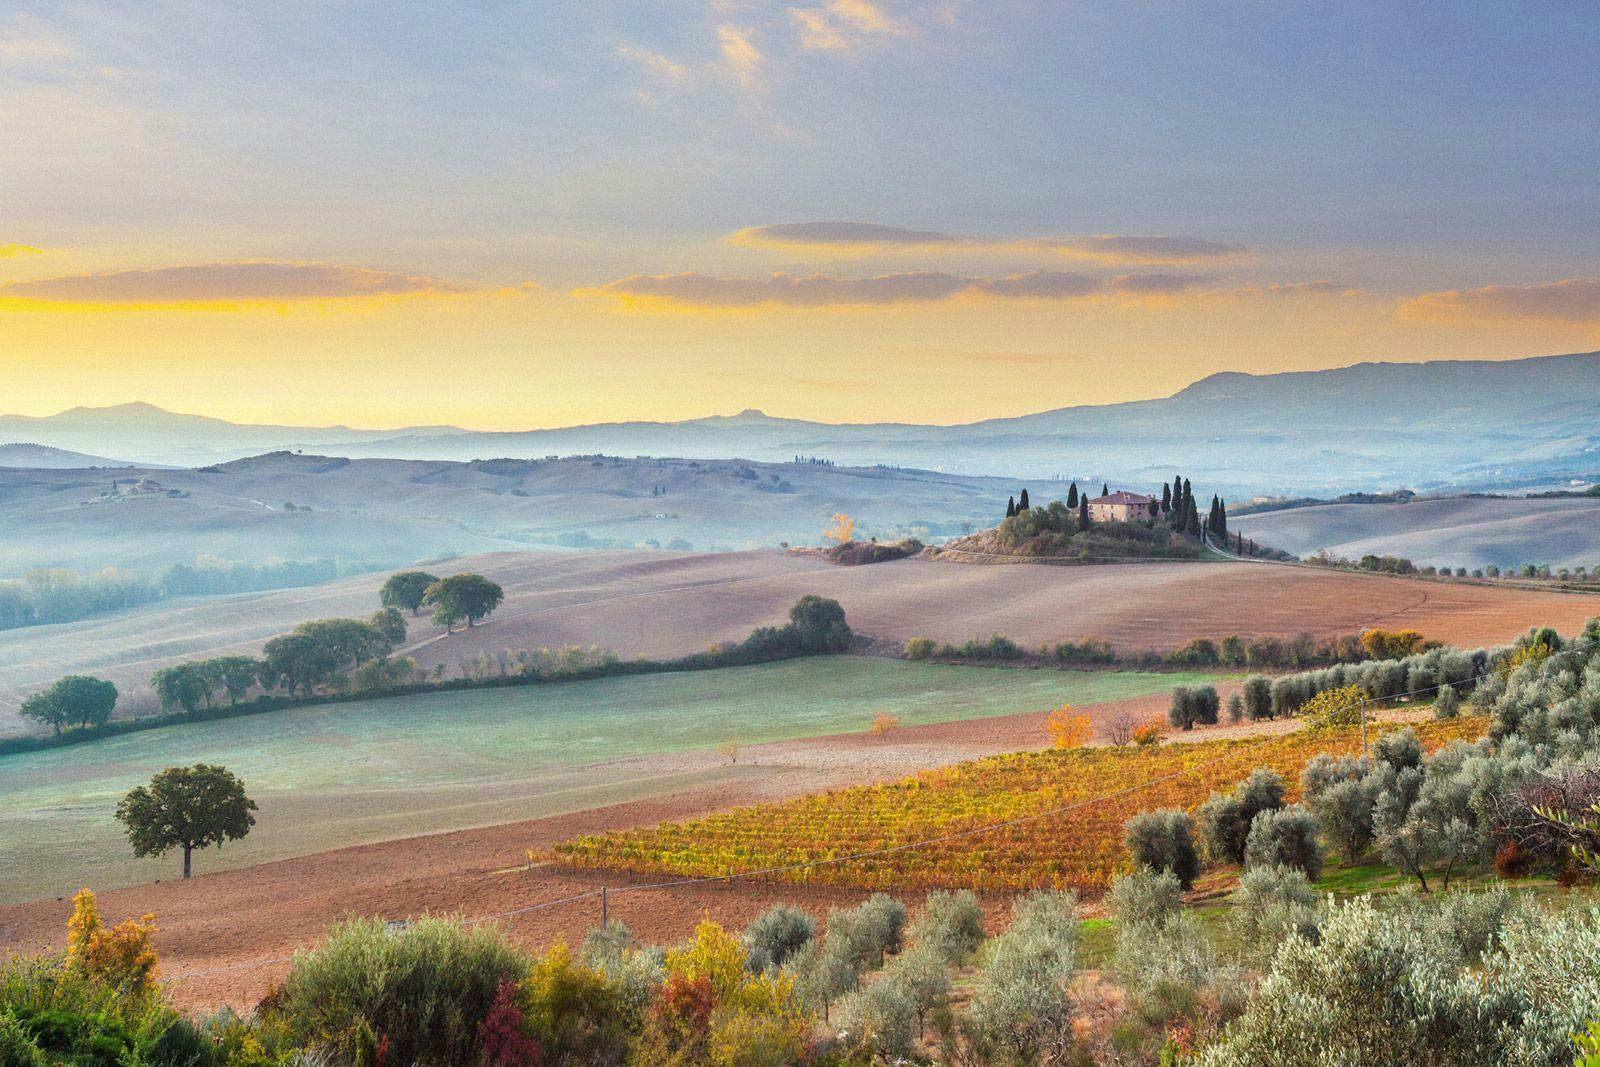 Soft morning light at sunrise over a misty landscape of rolling hills in Tuscany